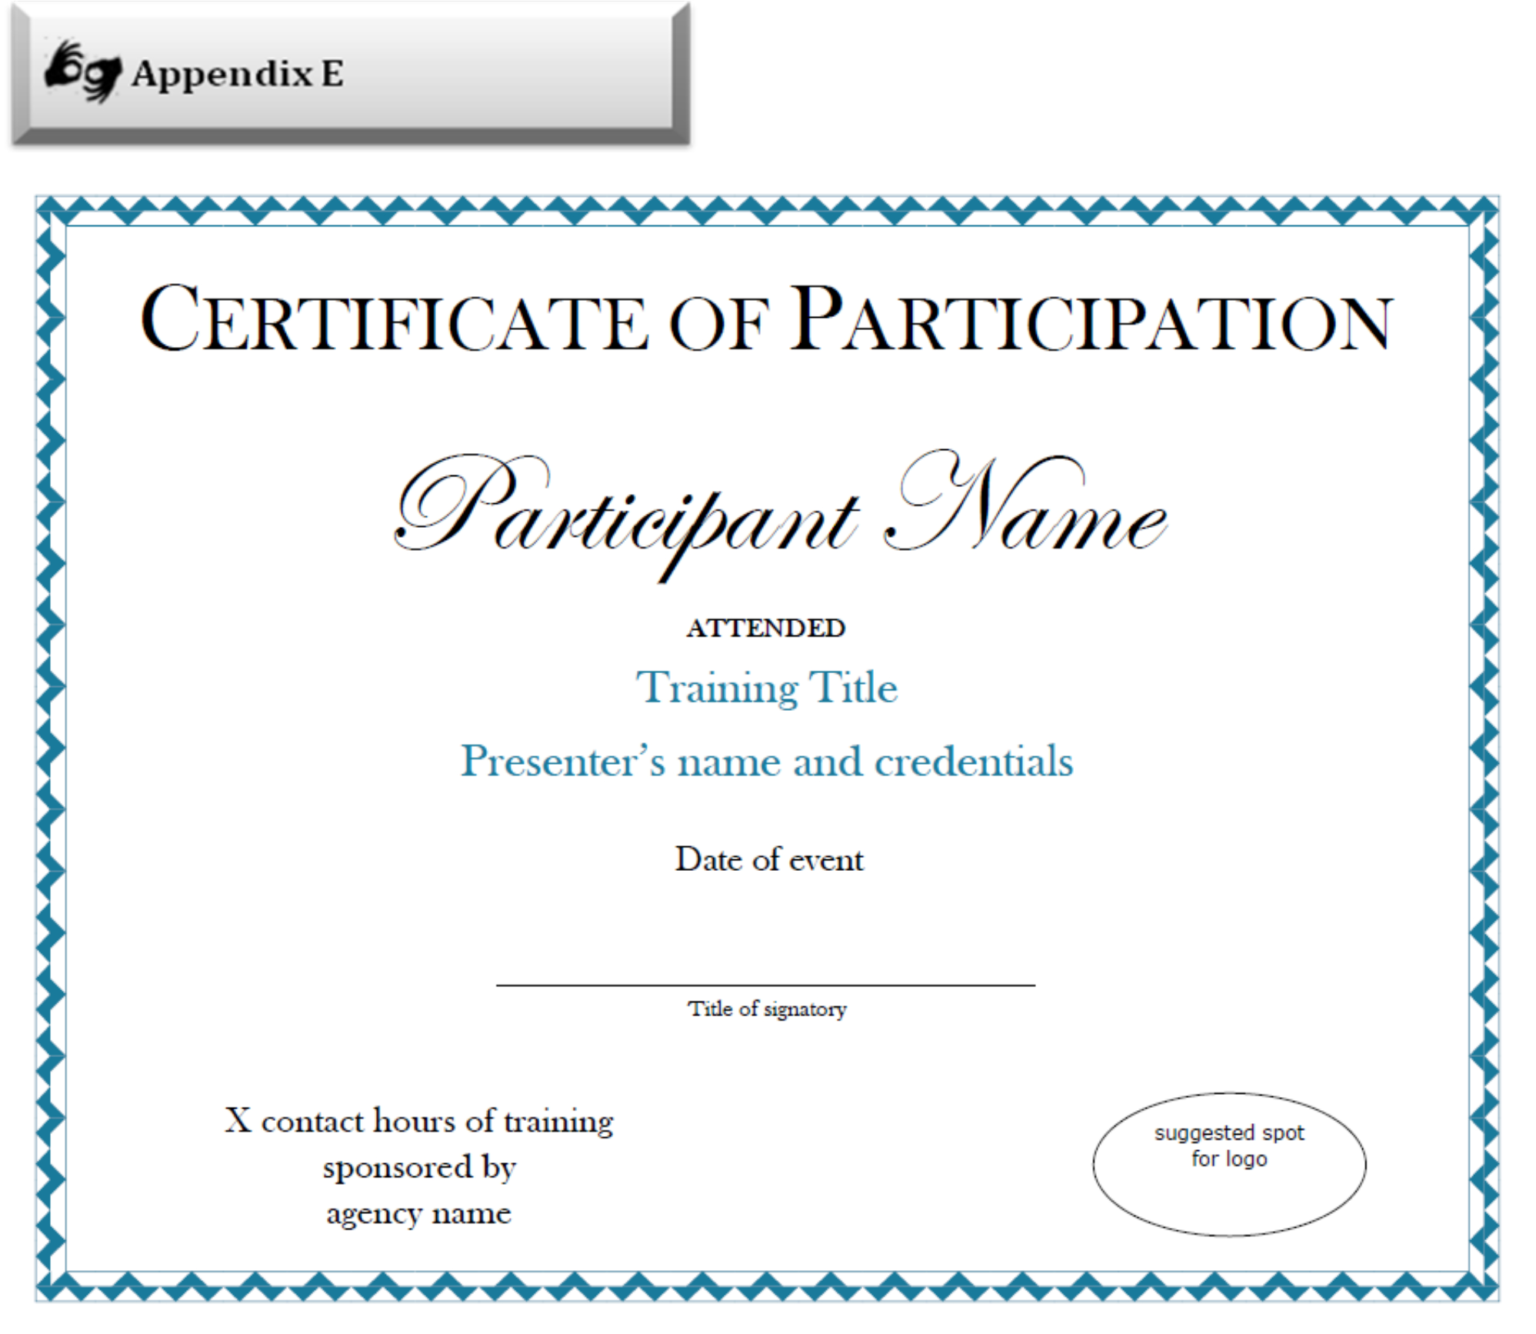 certificate-of-participation-sample-free-download-with-certificate-of